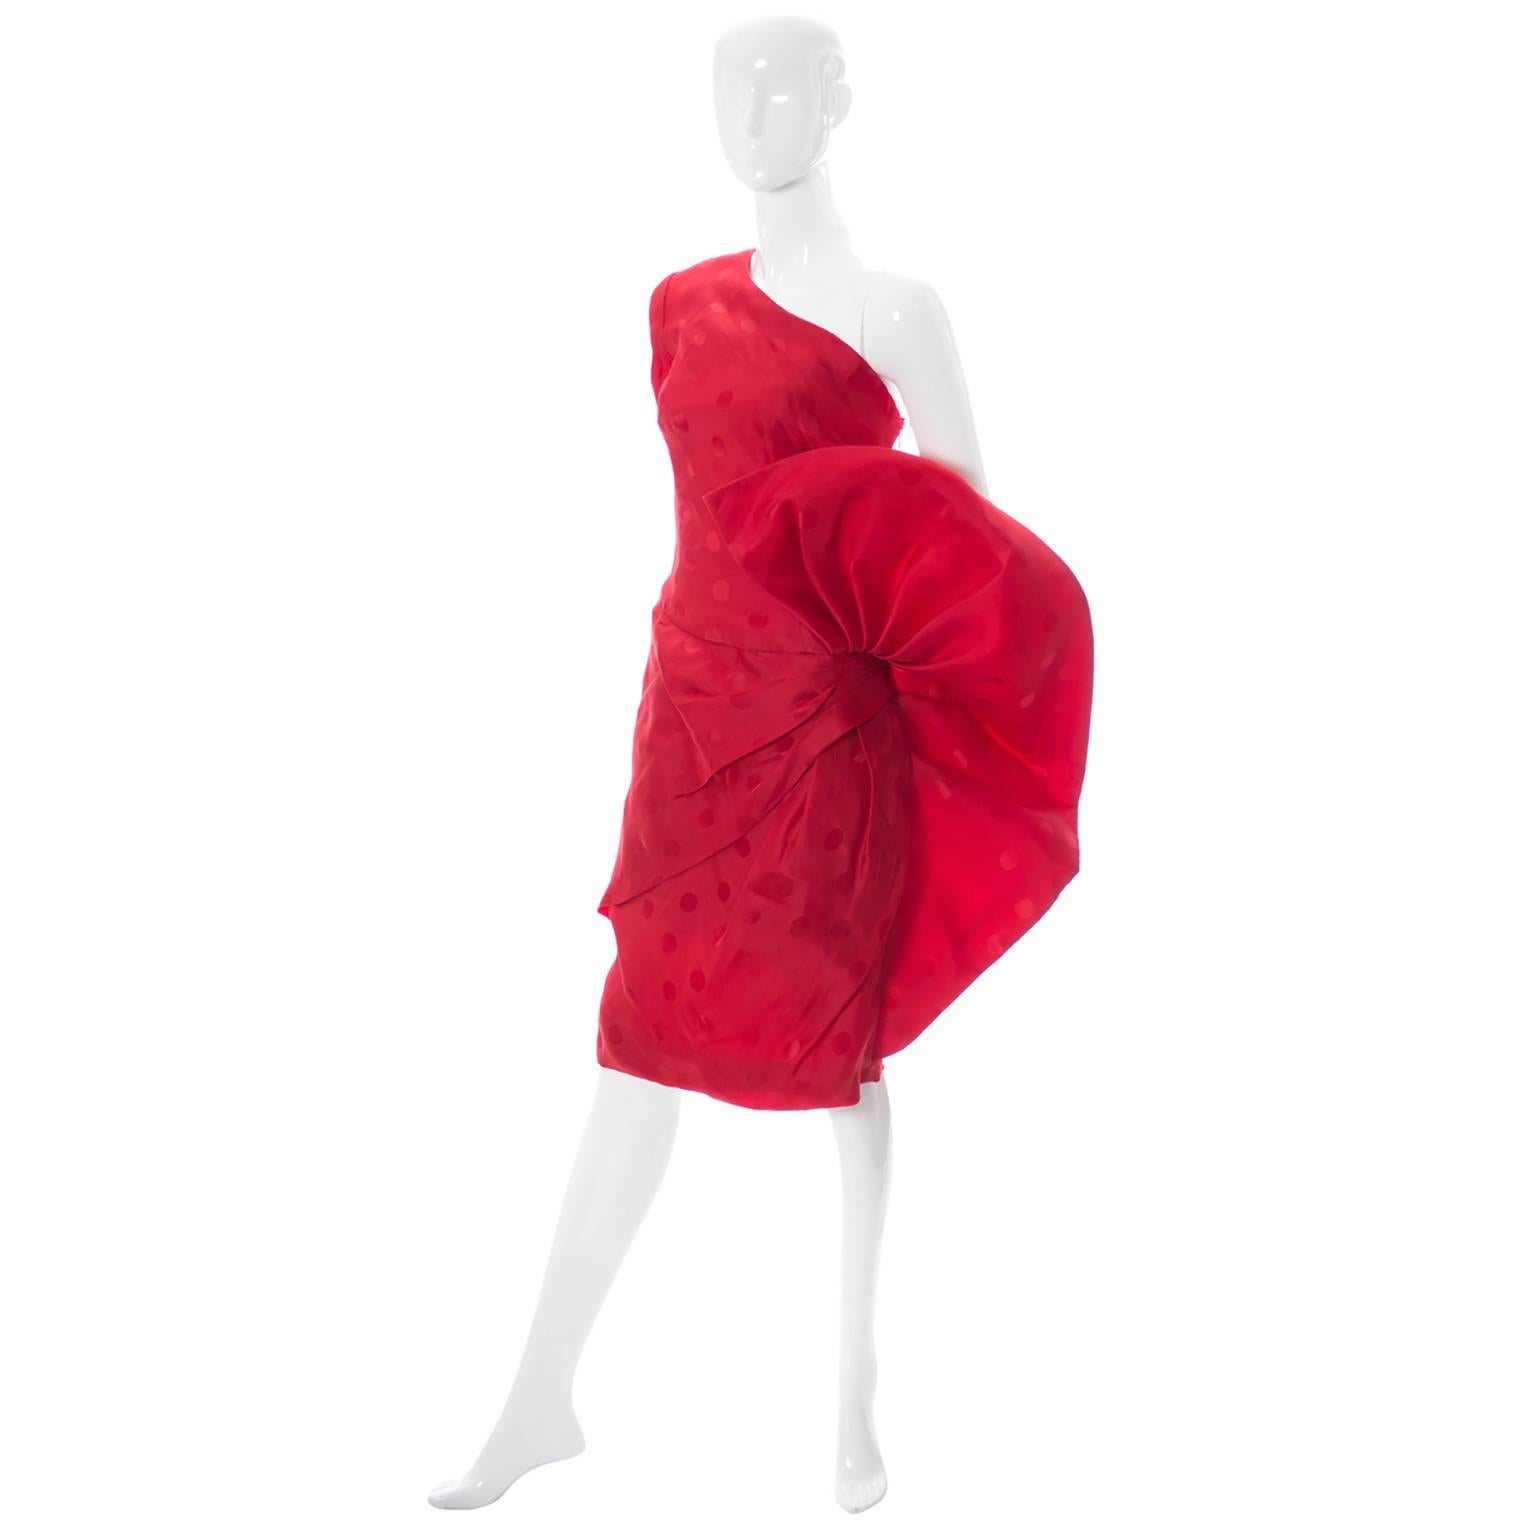 This is a 1980's show stopper vintage dress designed by Fernando Peña.  This is an amazing dress with a giant flared piece of fabric on the side that looks like a beautiful open flower!  The dress appears unworn and is in a gorgeous red satin